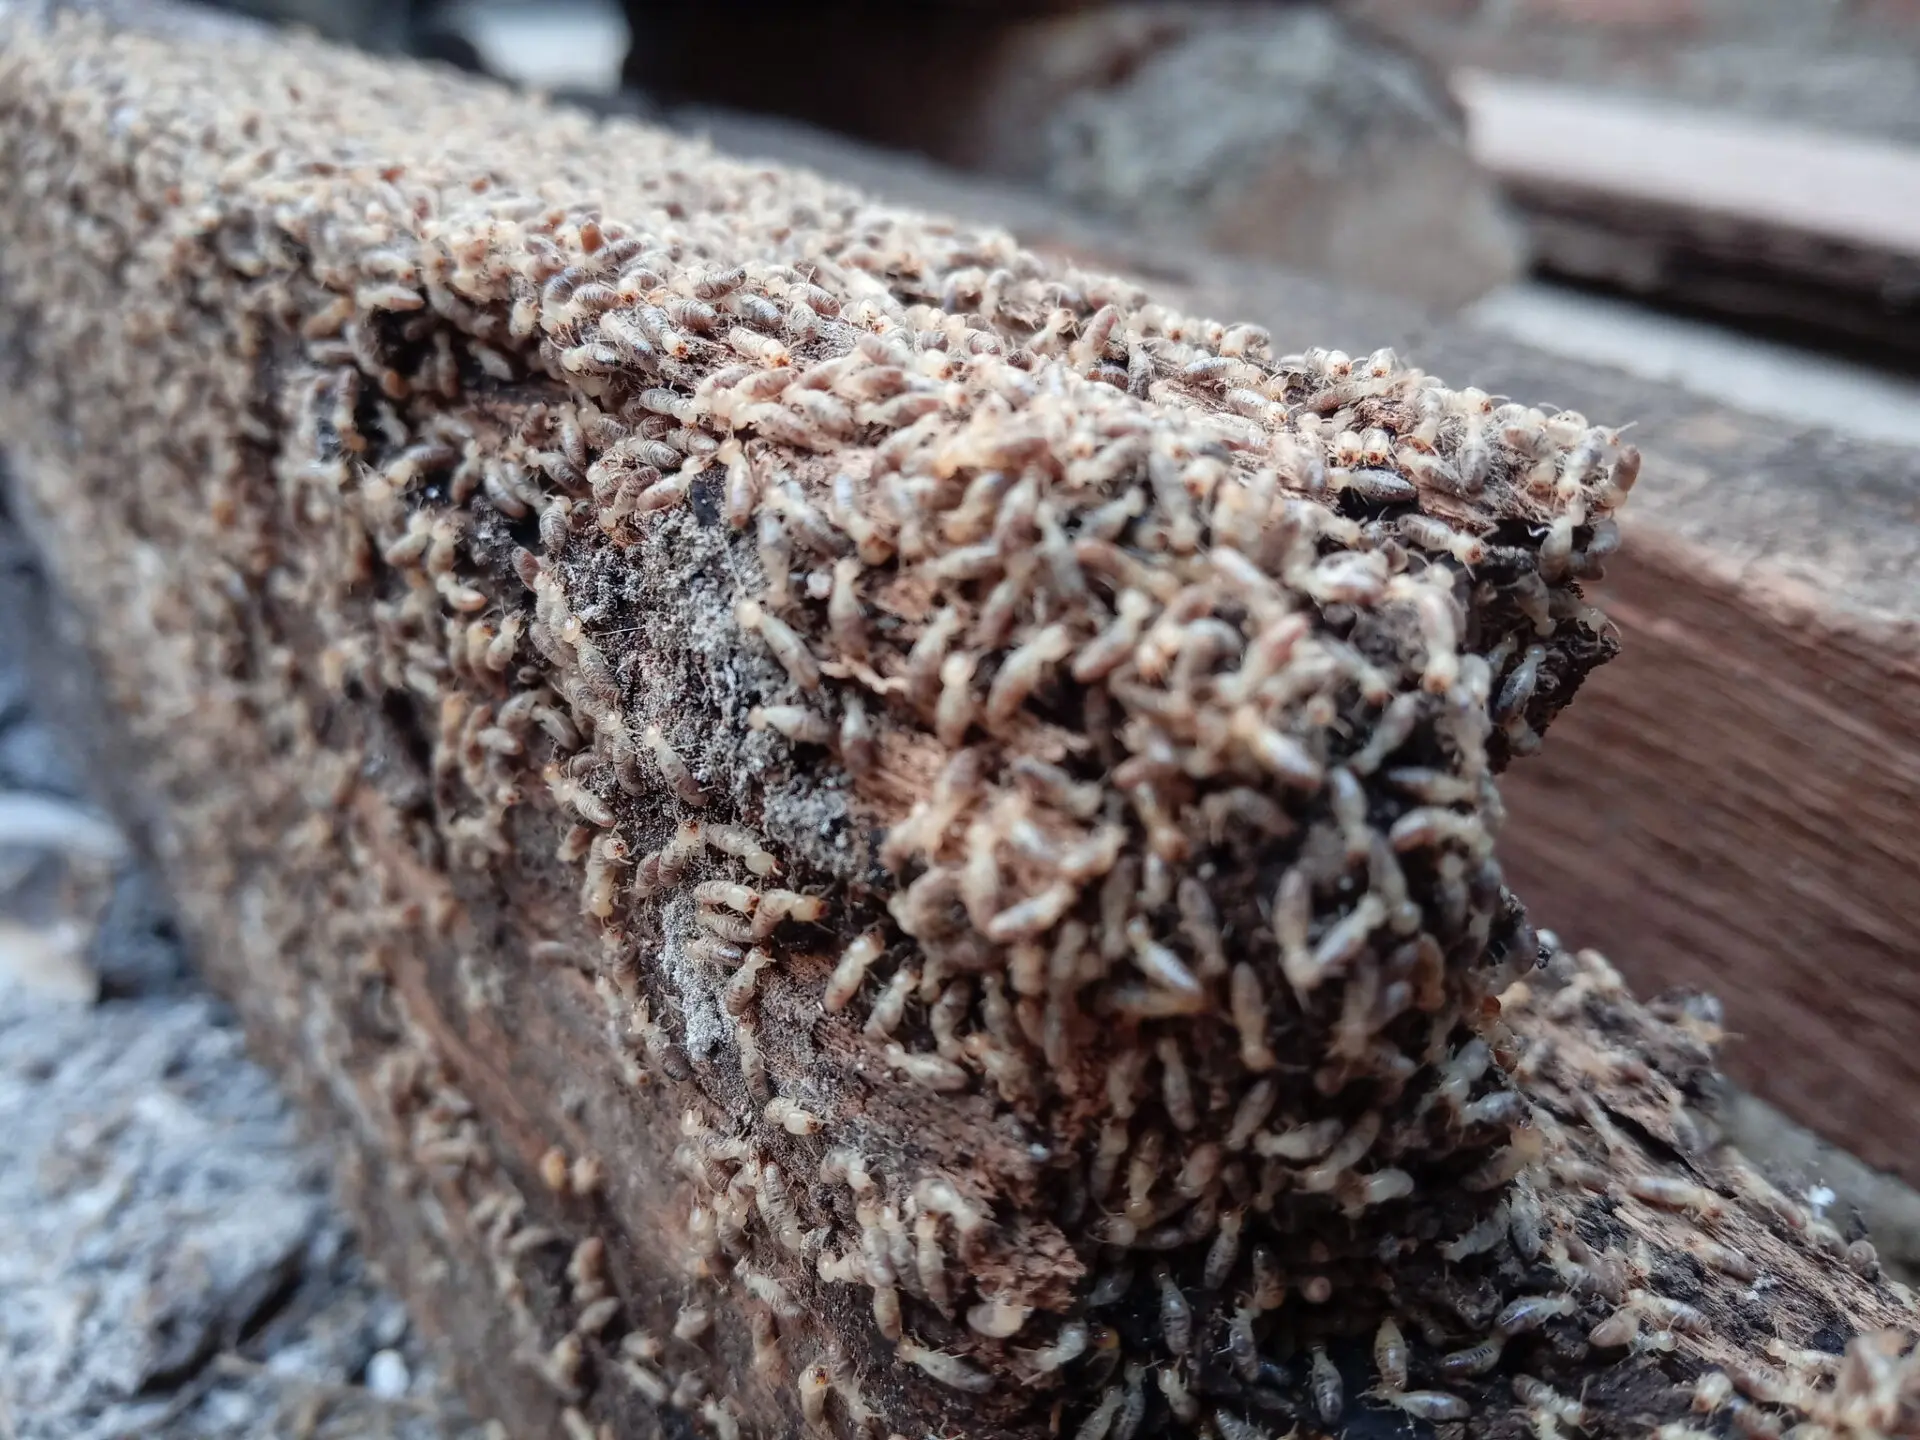 Close-up of a wooden log covered in tiny white fungi, with blurred rocks and other logs in the background.